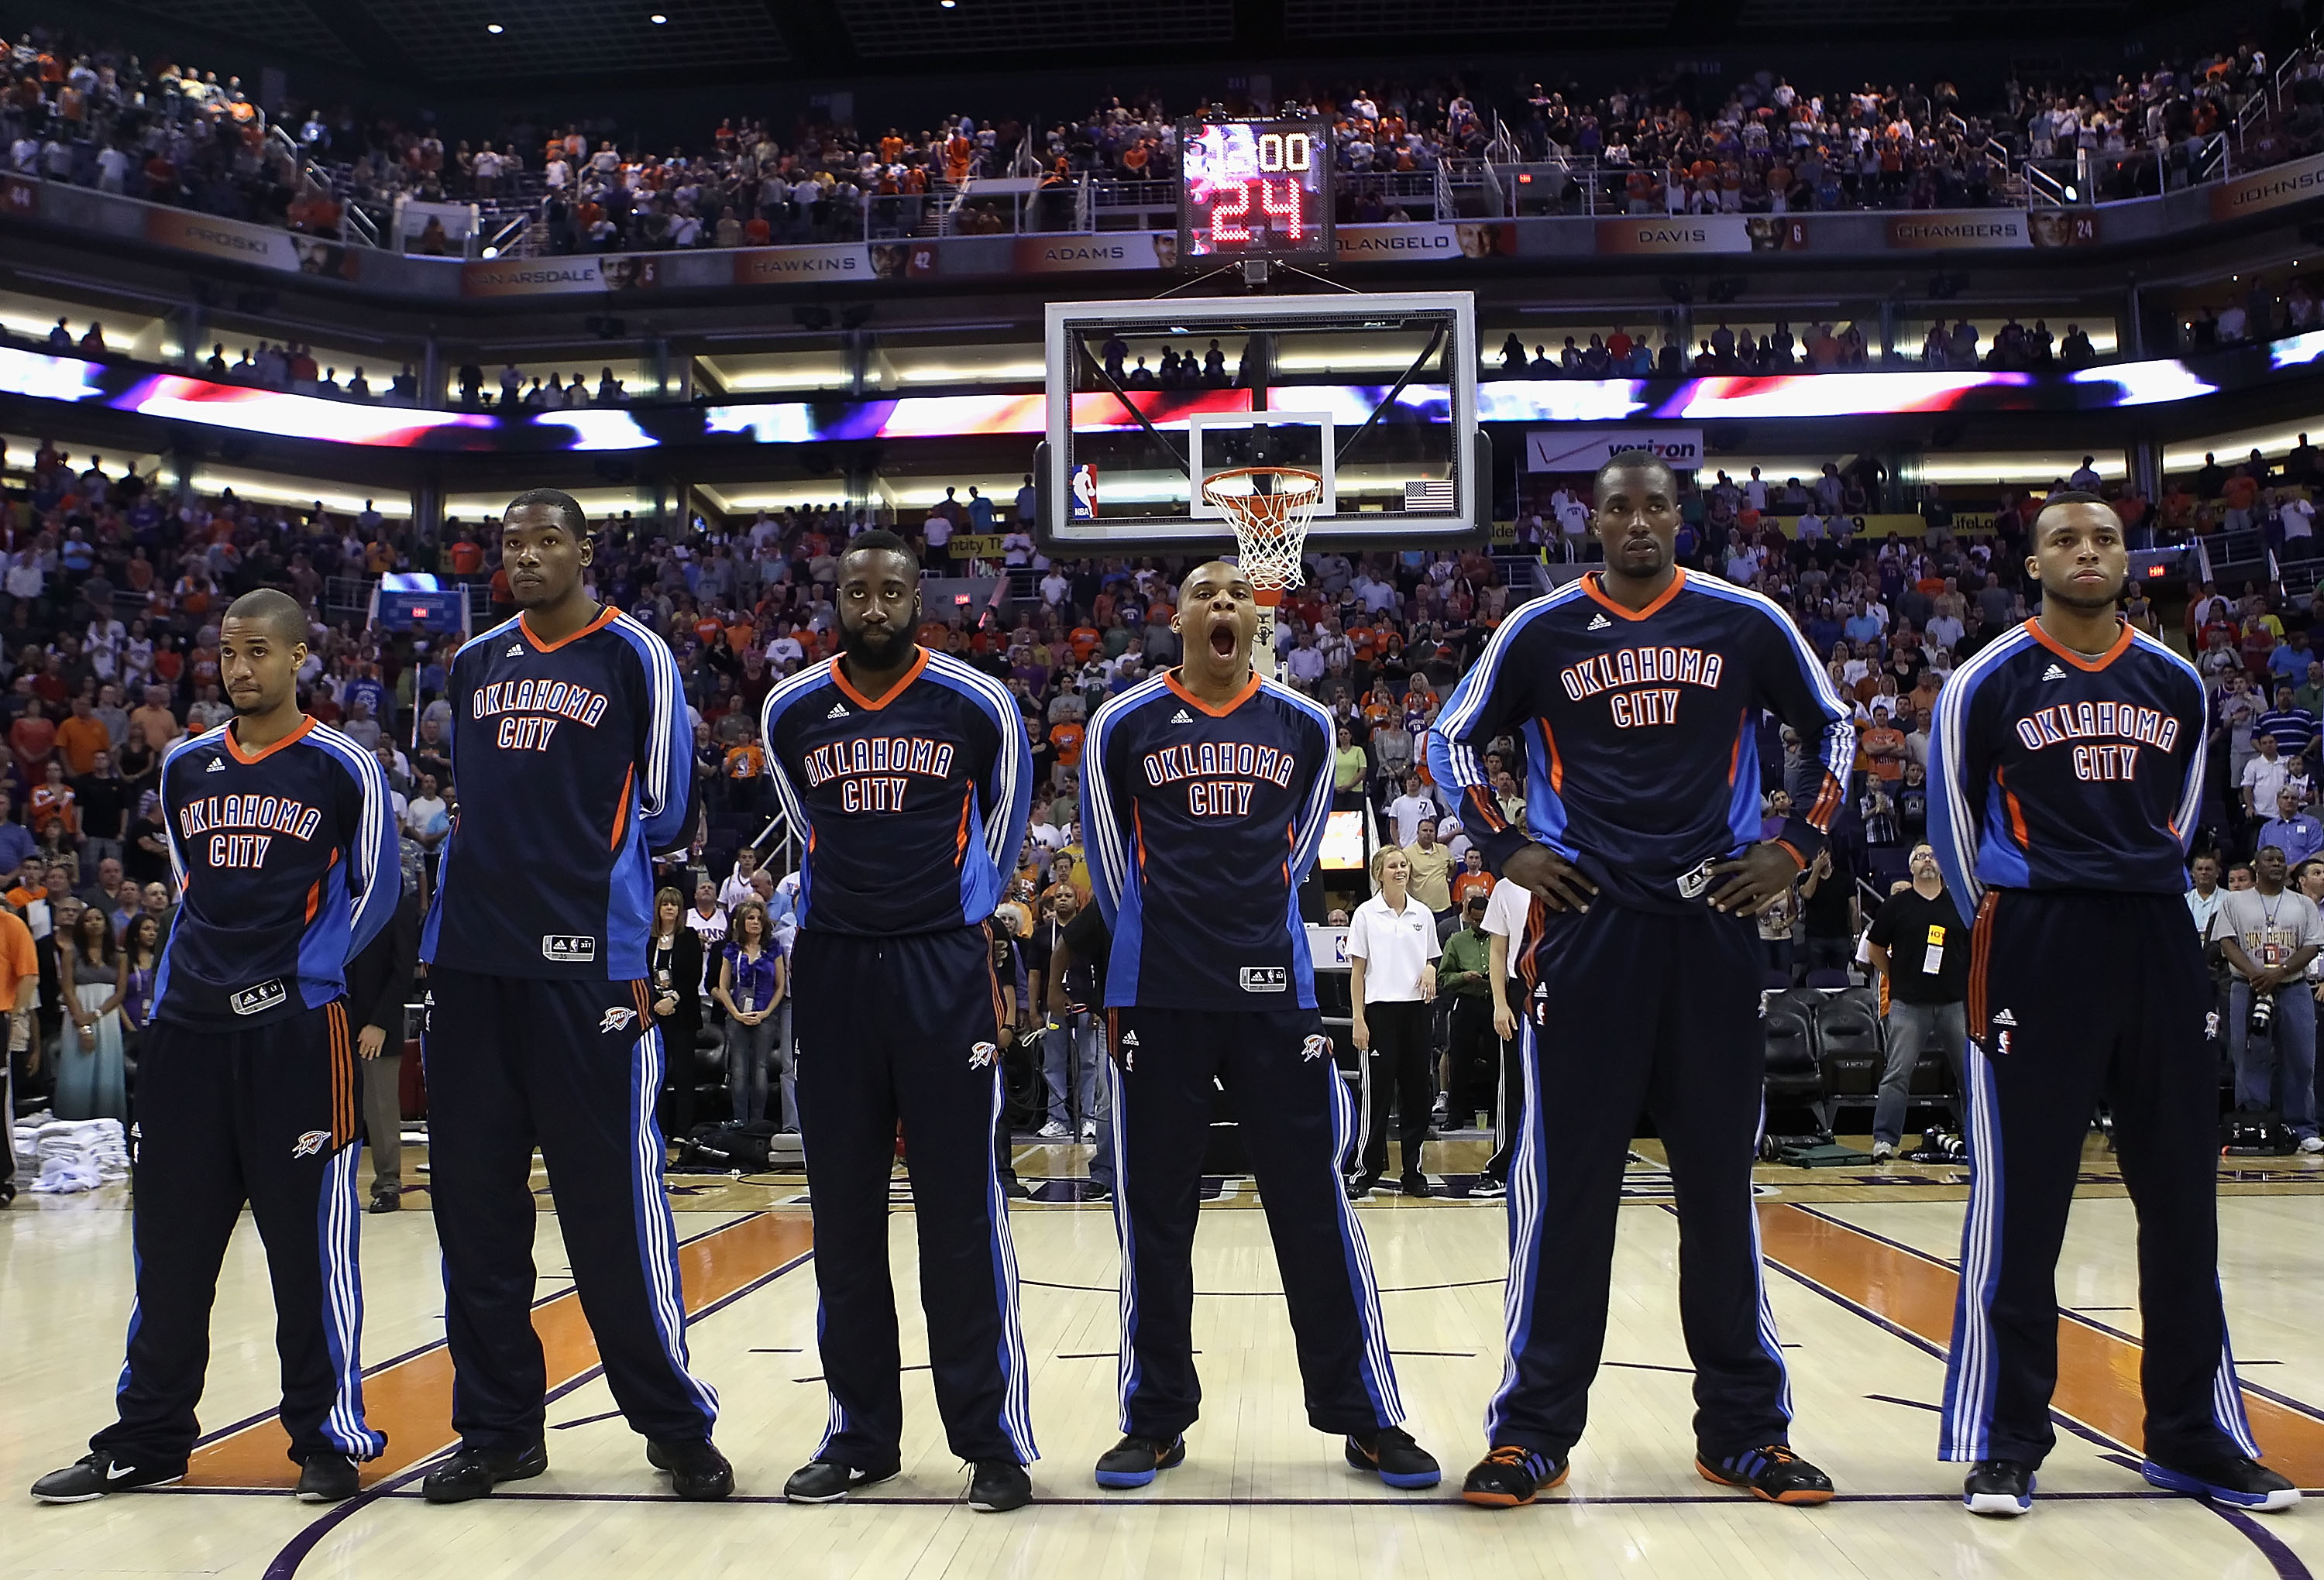 PHOENIX, AZ - MARCH 30:  The Oklahoma City Thunder stand attended before the NBA game against the Phoenix Suns at US Airways Center on March 30, 2011 in Phoenix, Arizona. The Thunder defeated the Suns 116-98.   NOTE TO USER: User expressly acknowledges an